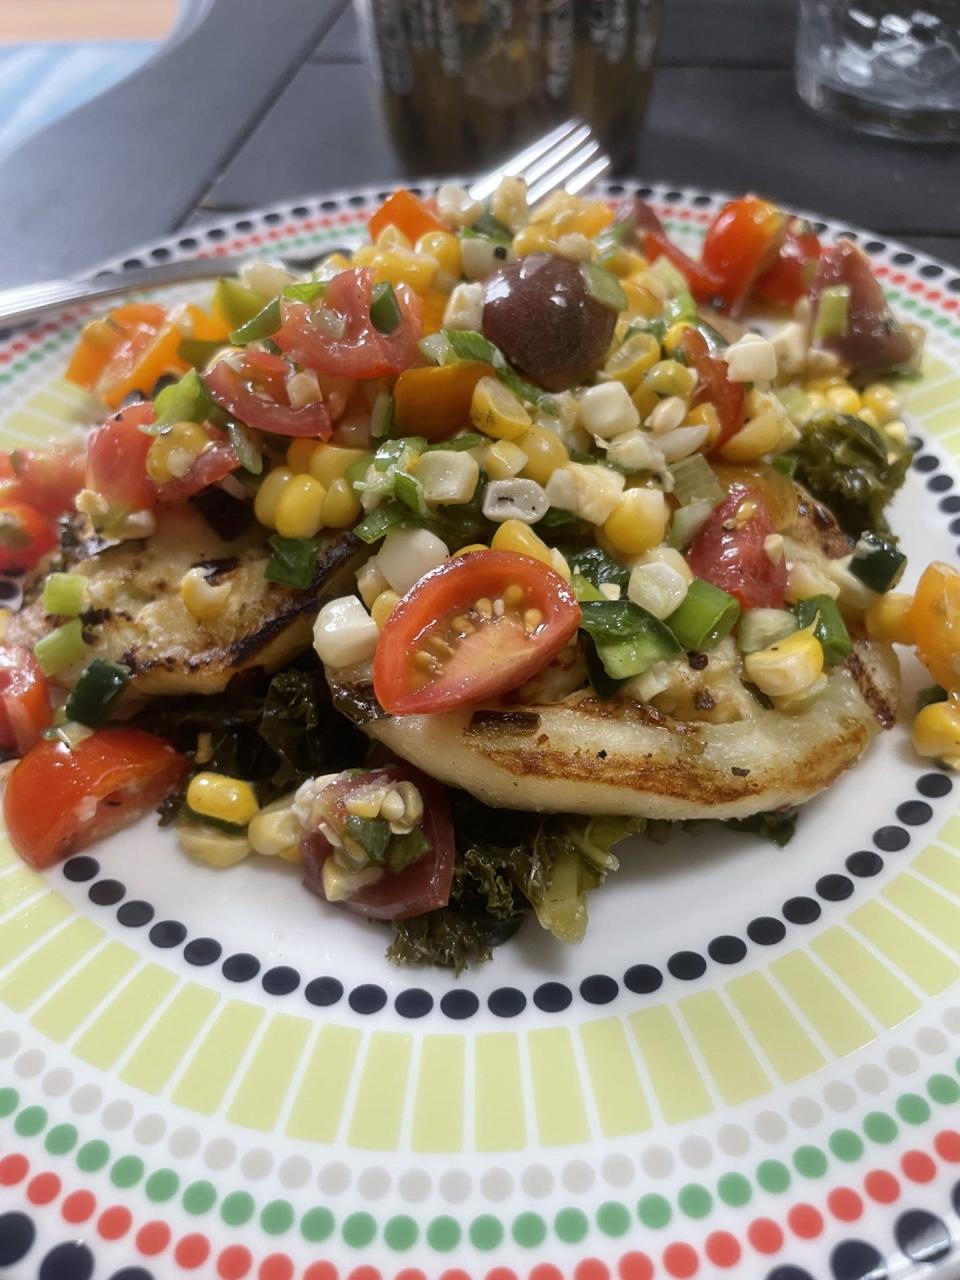 Full of local flavors this dish stars grilled eggplant topped with southern twist on chimichurri feating sweet corn and tomatoes.